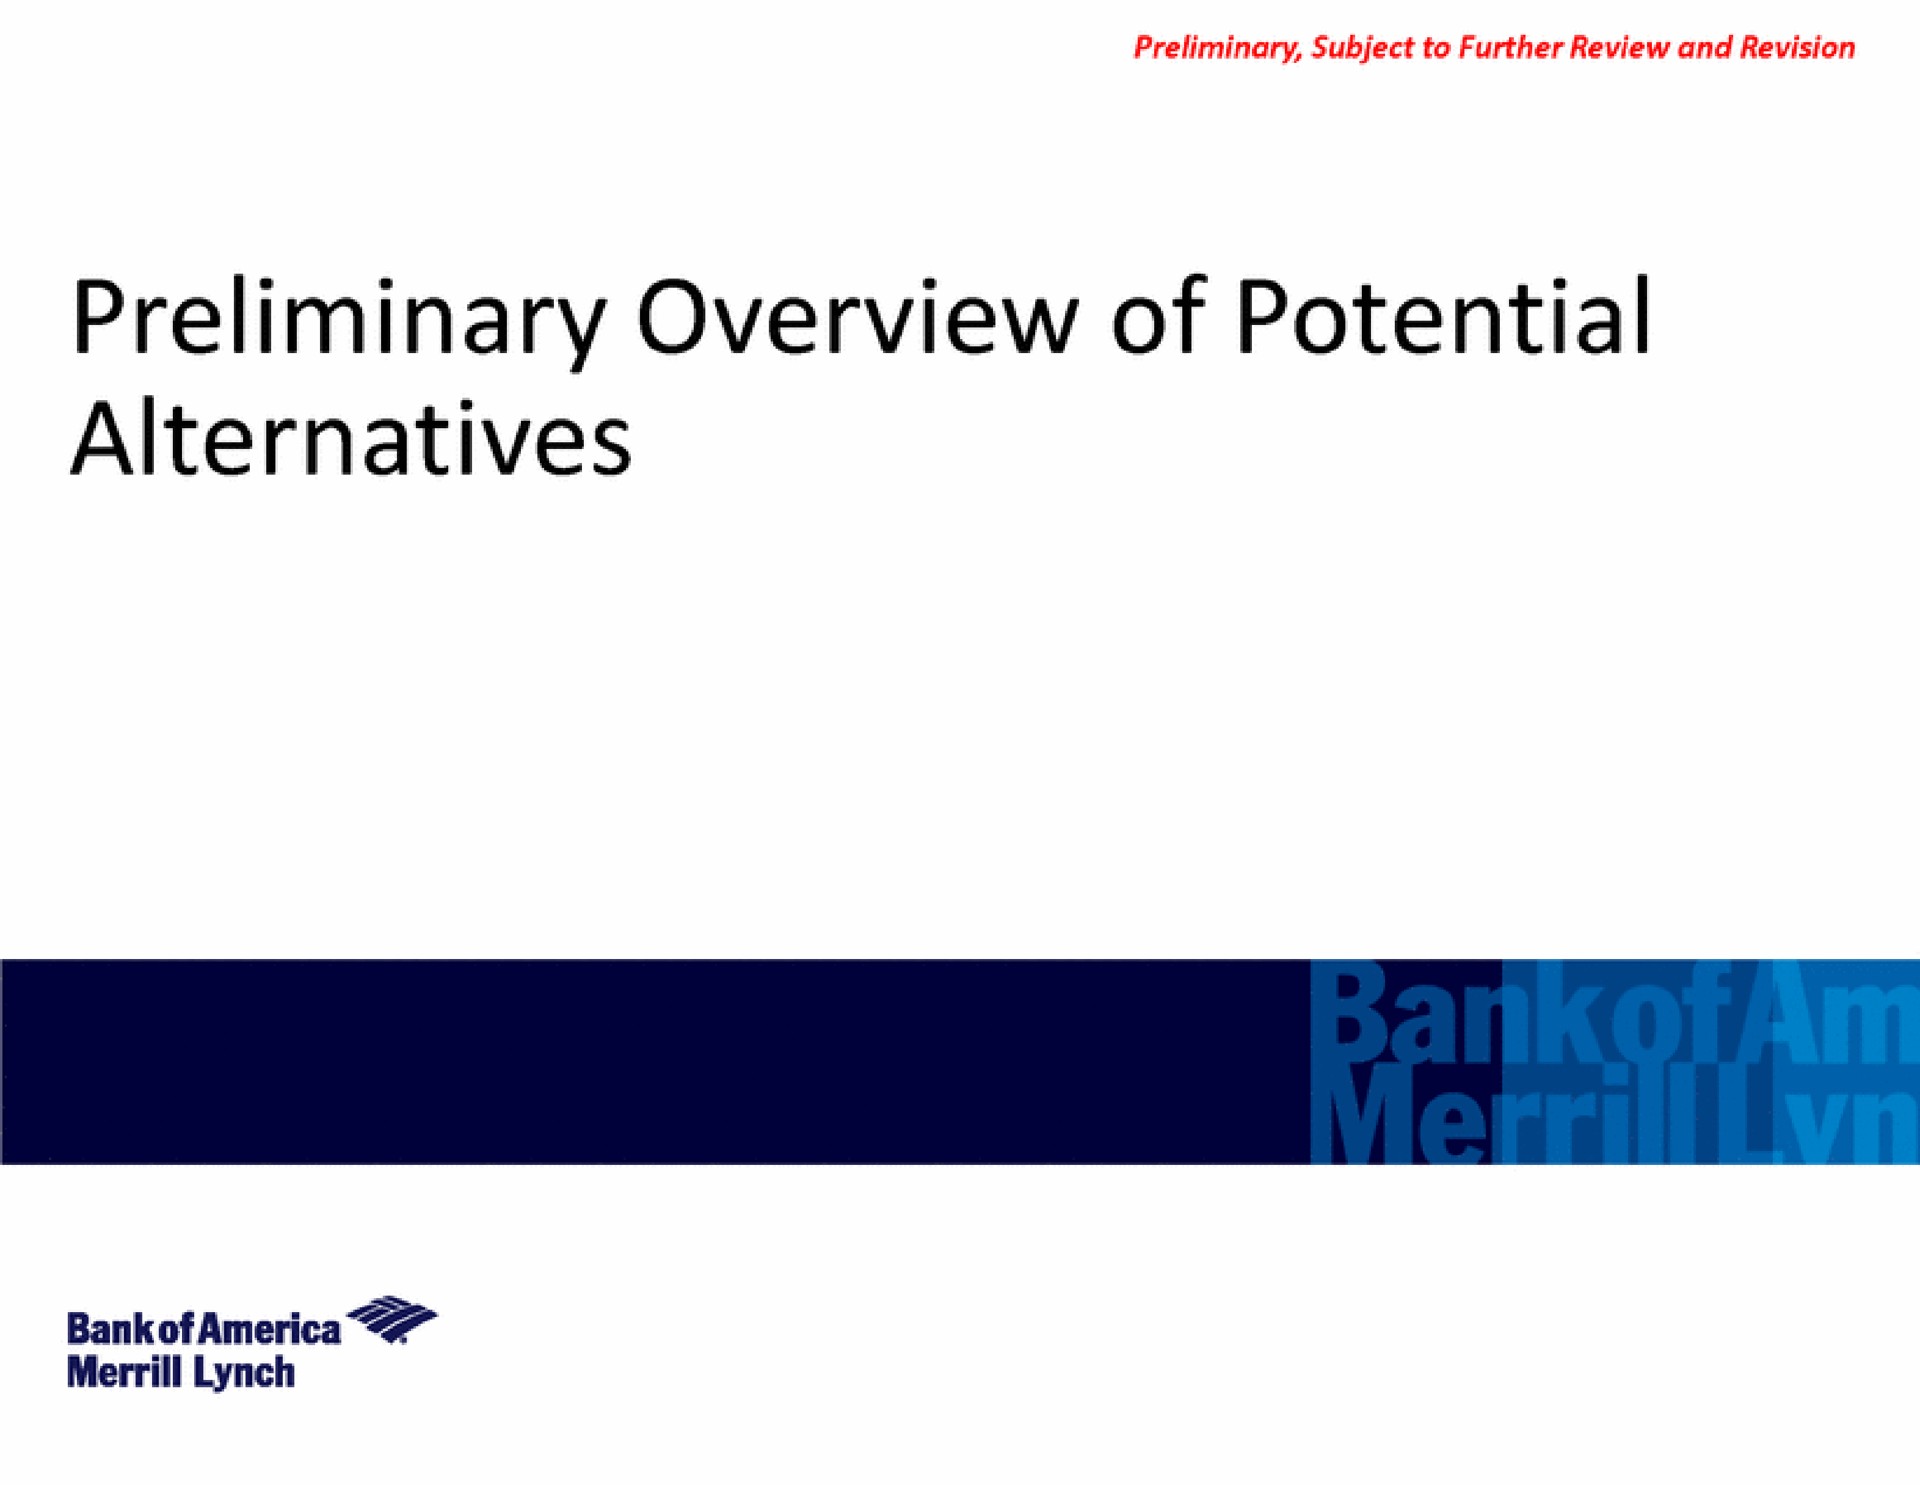 preliminary overview of potential alternatives bank of lynch | Bank of America